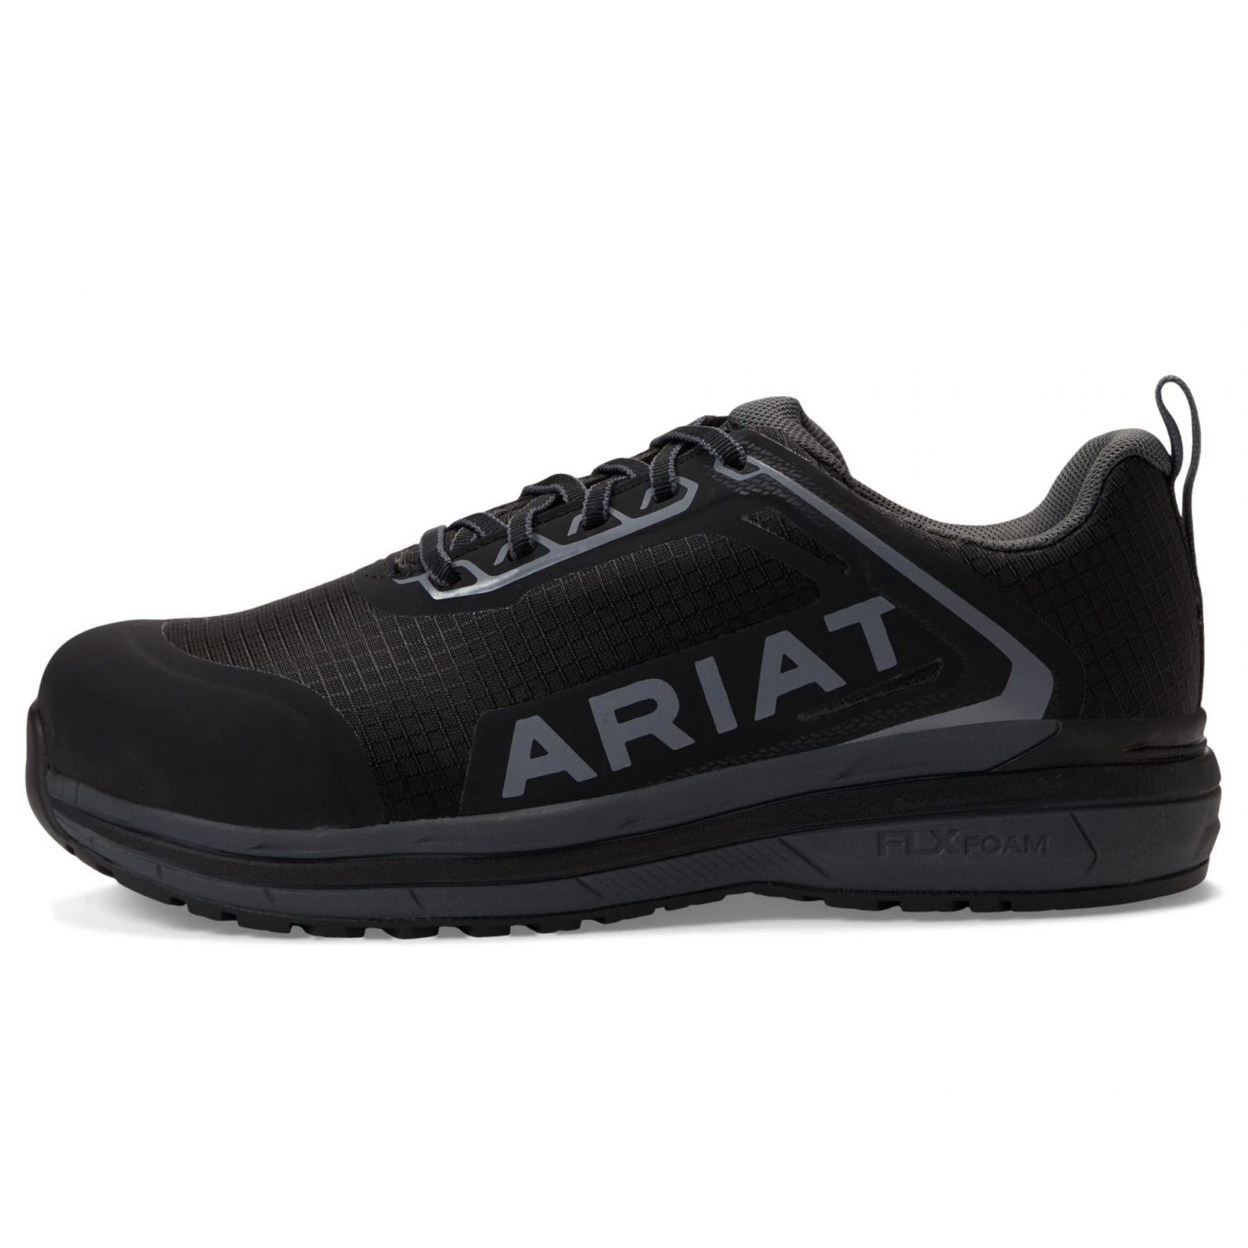 ARIAT Women's Outpace Composite Toe Safety Shoe Fire ONE SIZE BLACK - BLACK, 6.5 Wide